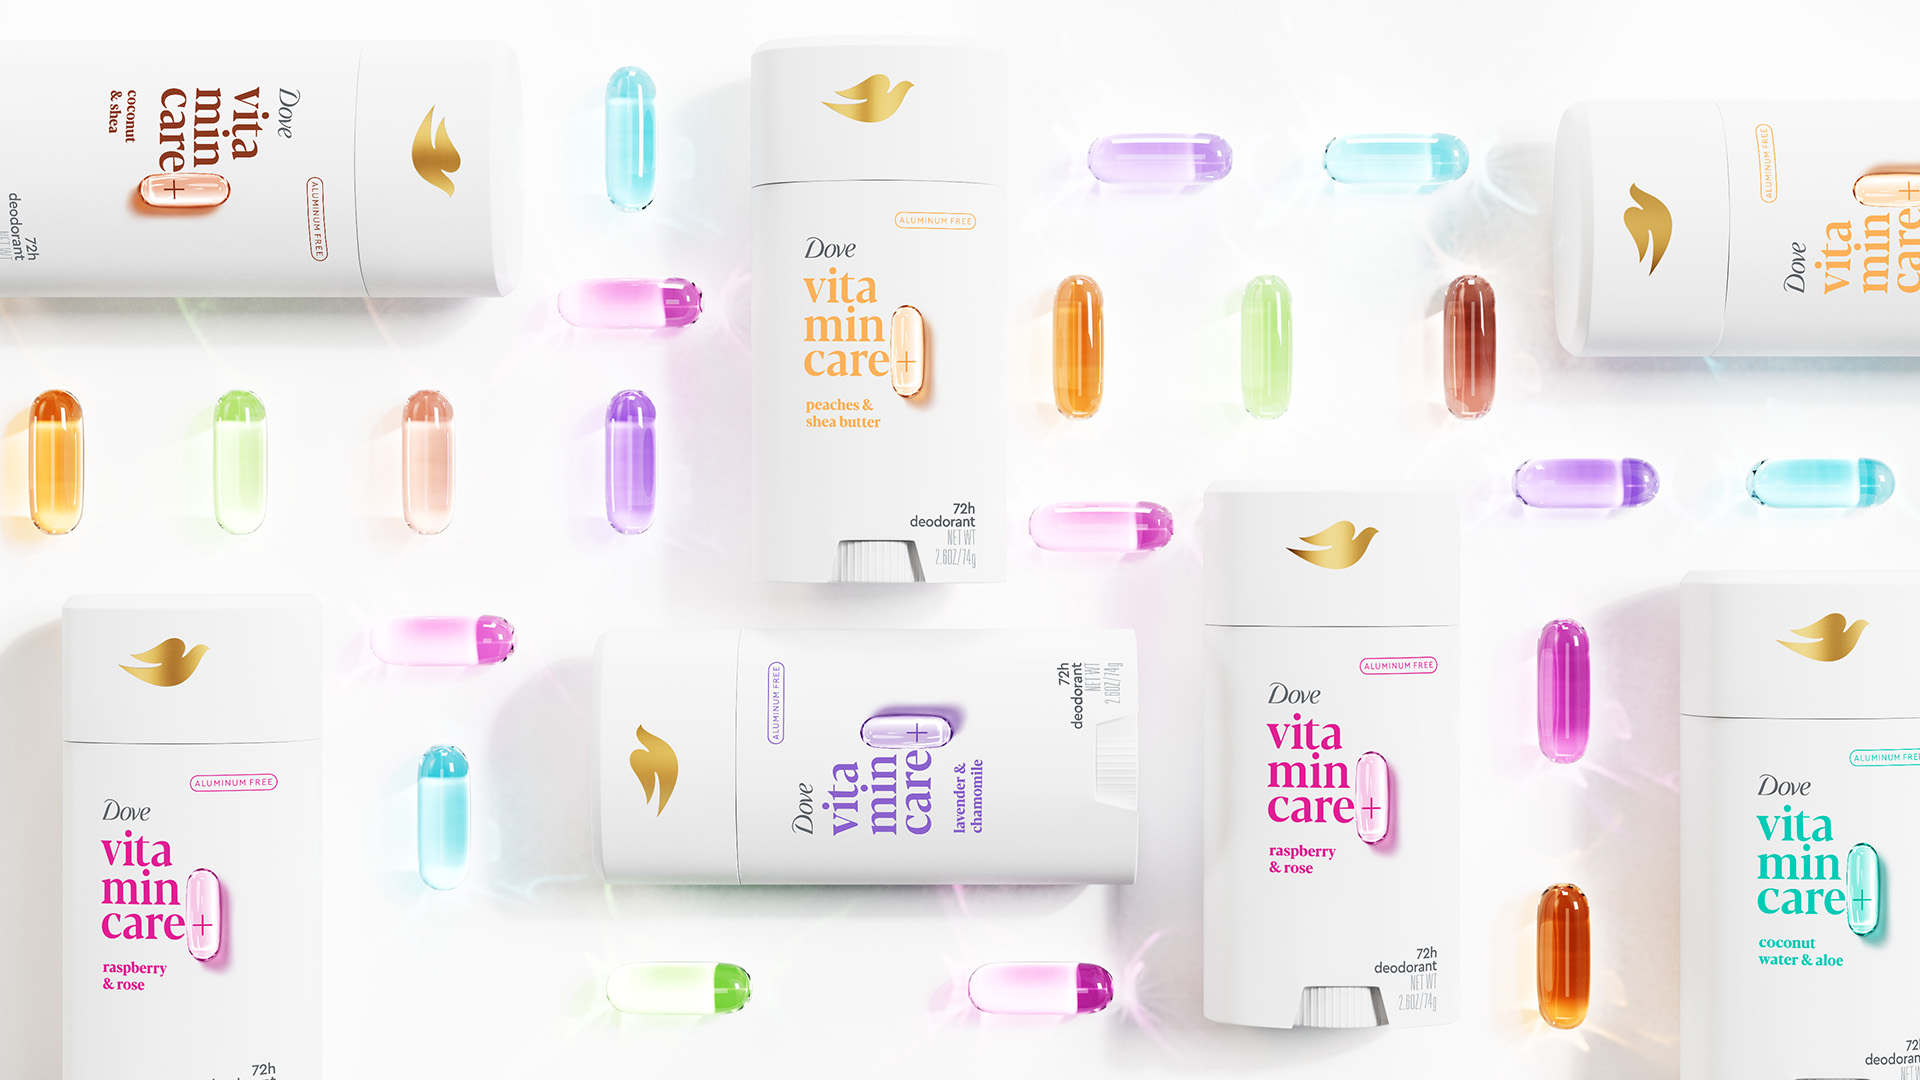 JDO Elevates Clean Beauty Standards With the Design of Dove Vitamin Care+